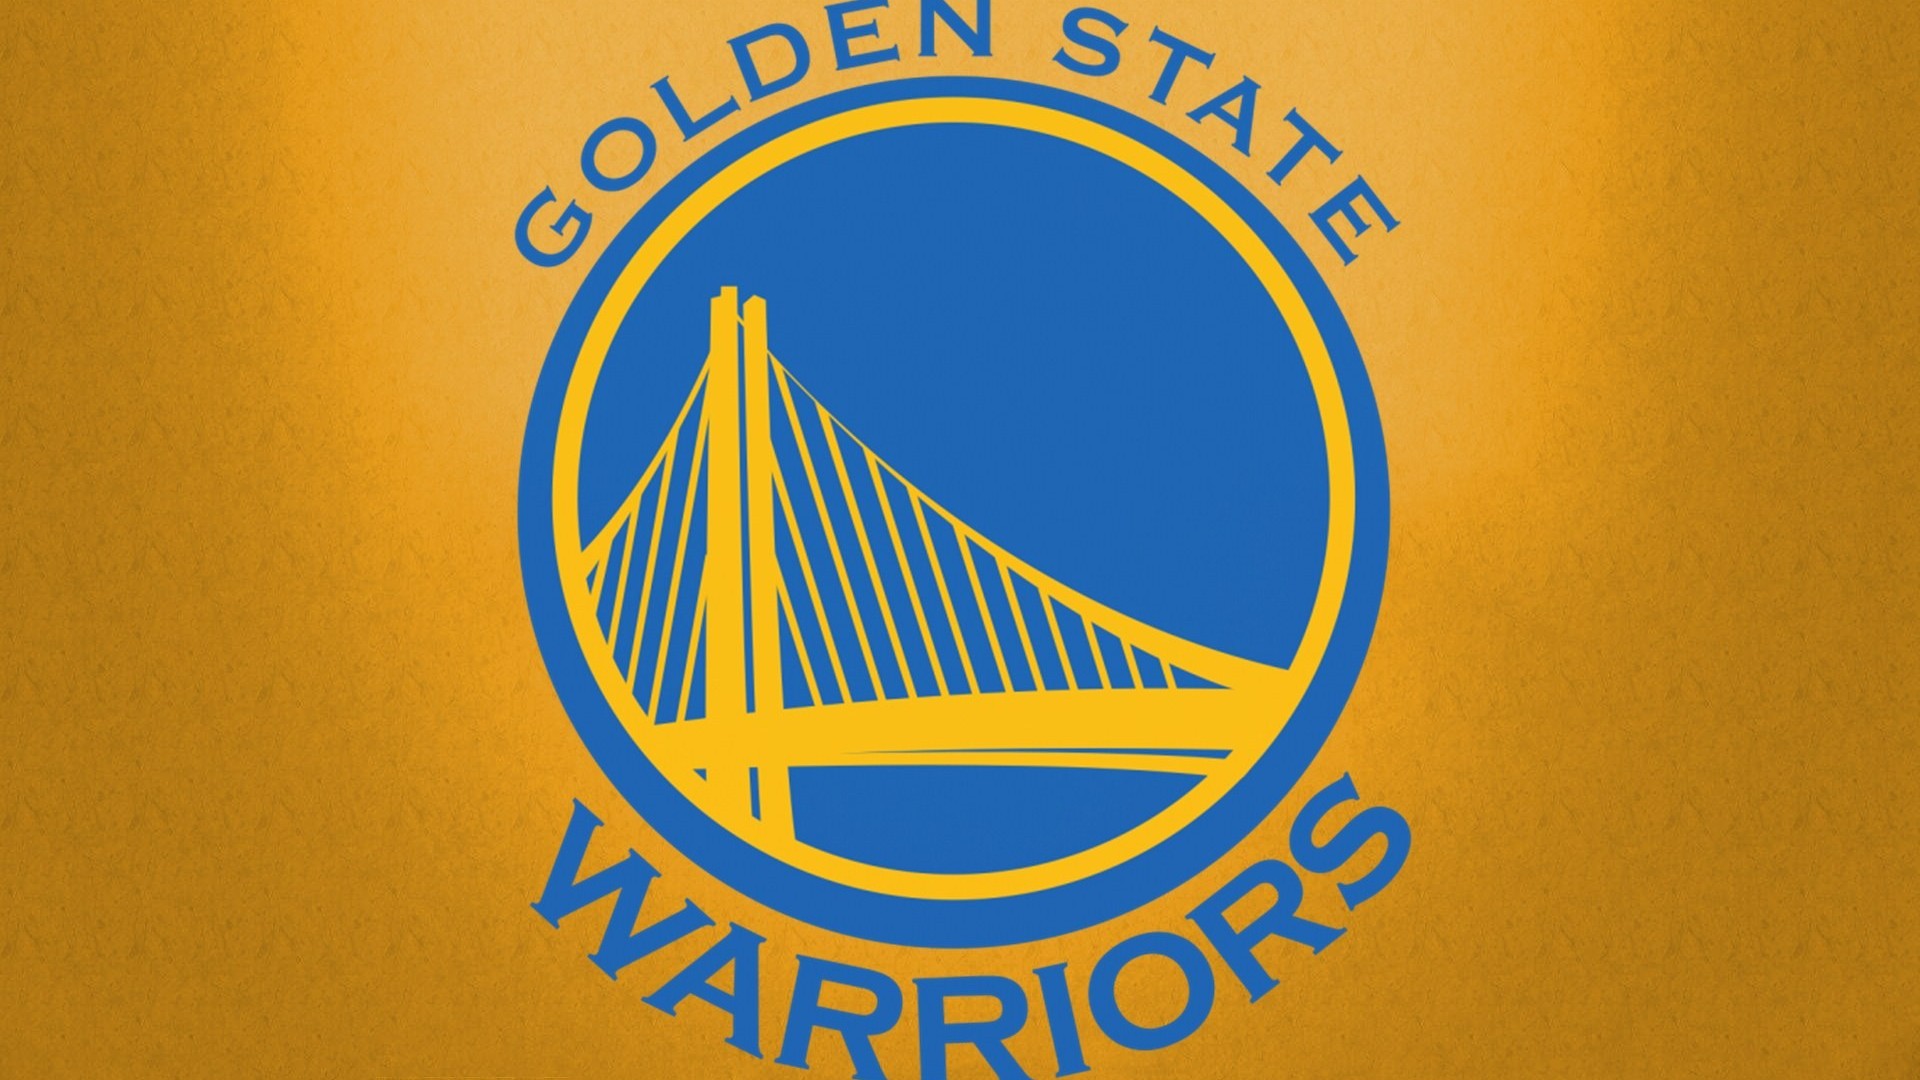 The Warriors Wall Paper Wallpapers